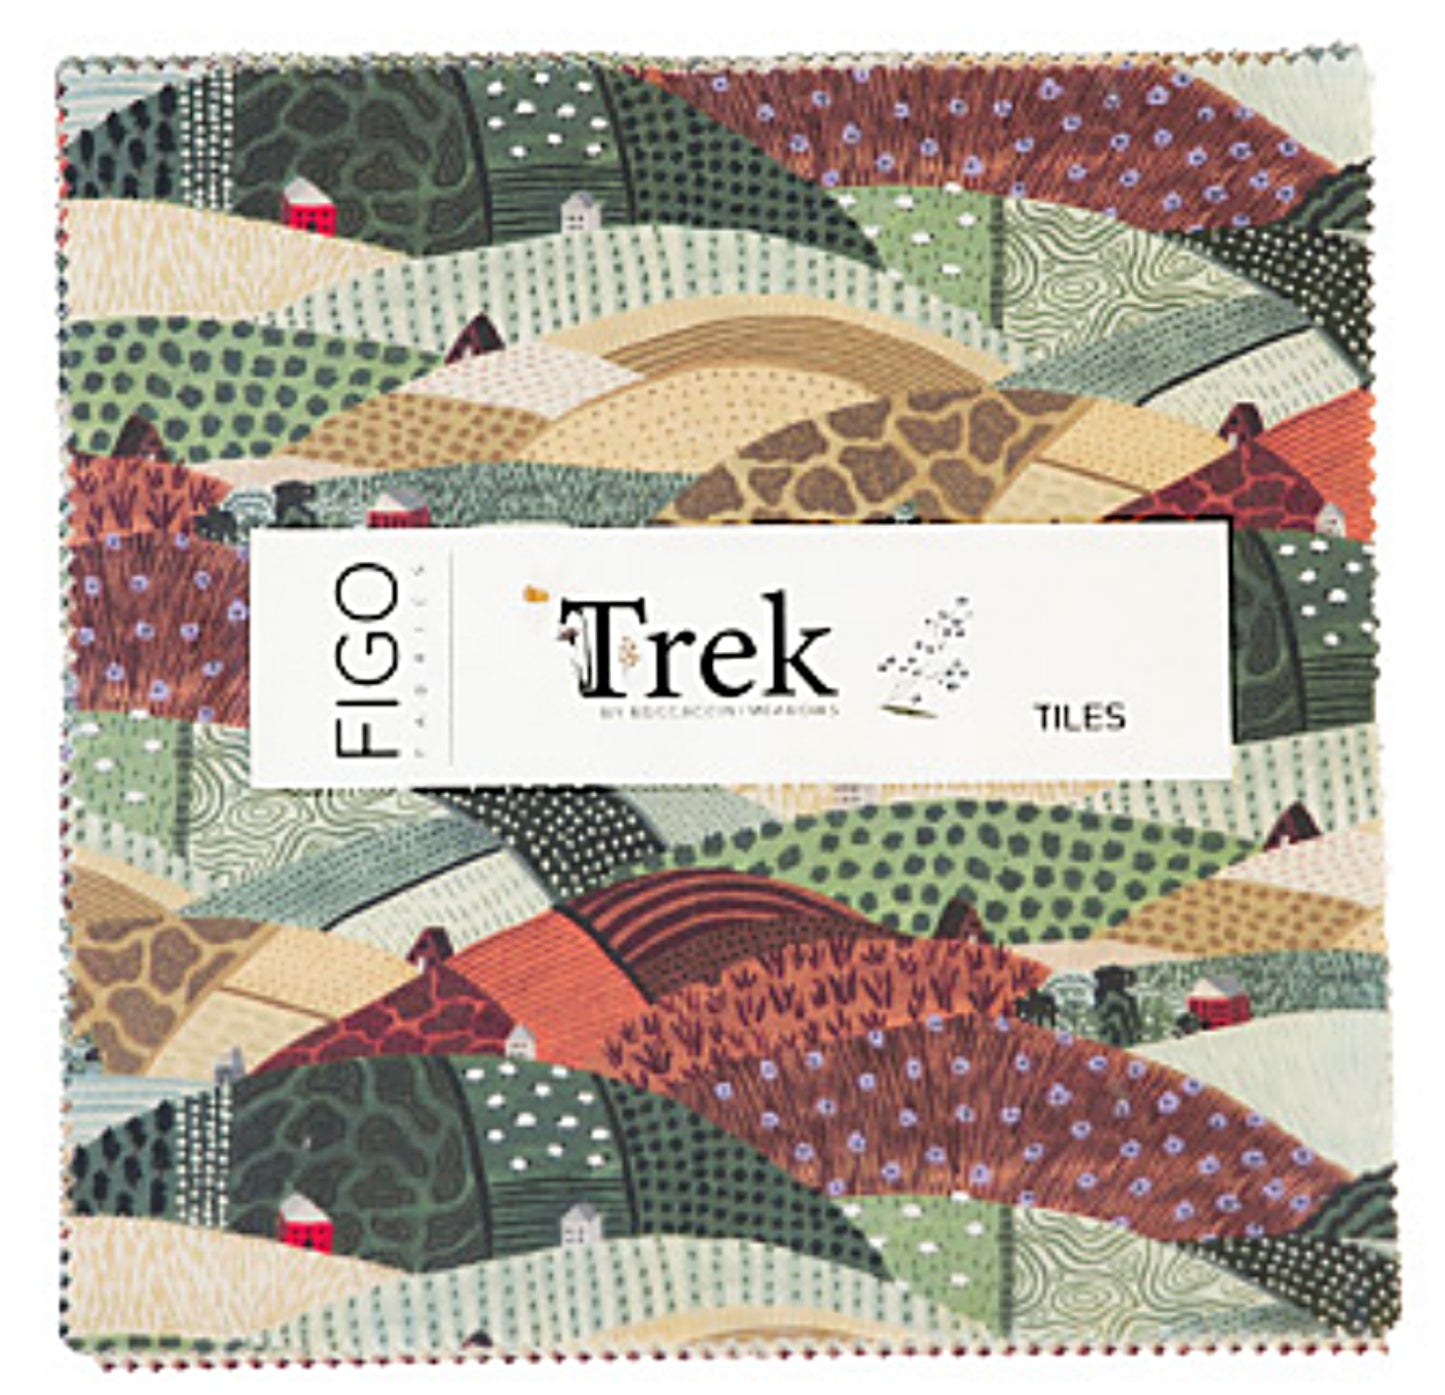 Trek Tiles - Layer Cake 10 x 10 in - Complete trek Collection by Boccaccini Meadows for Figo Fabrics. 42 pc complete Trek Collection. 100% Cotton, digitally printed.